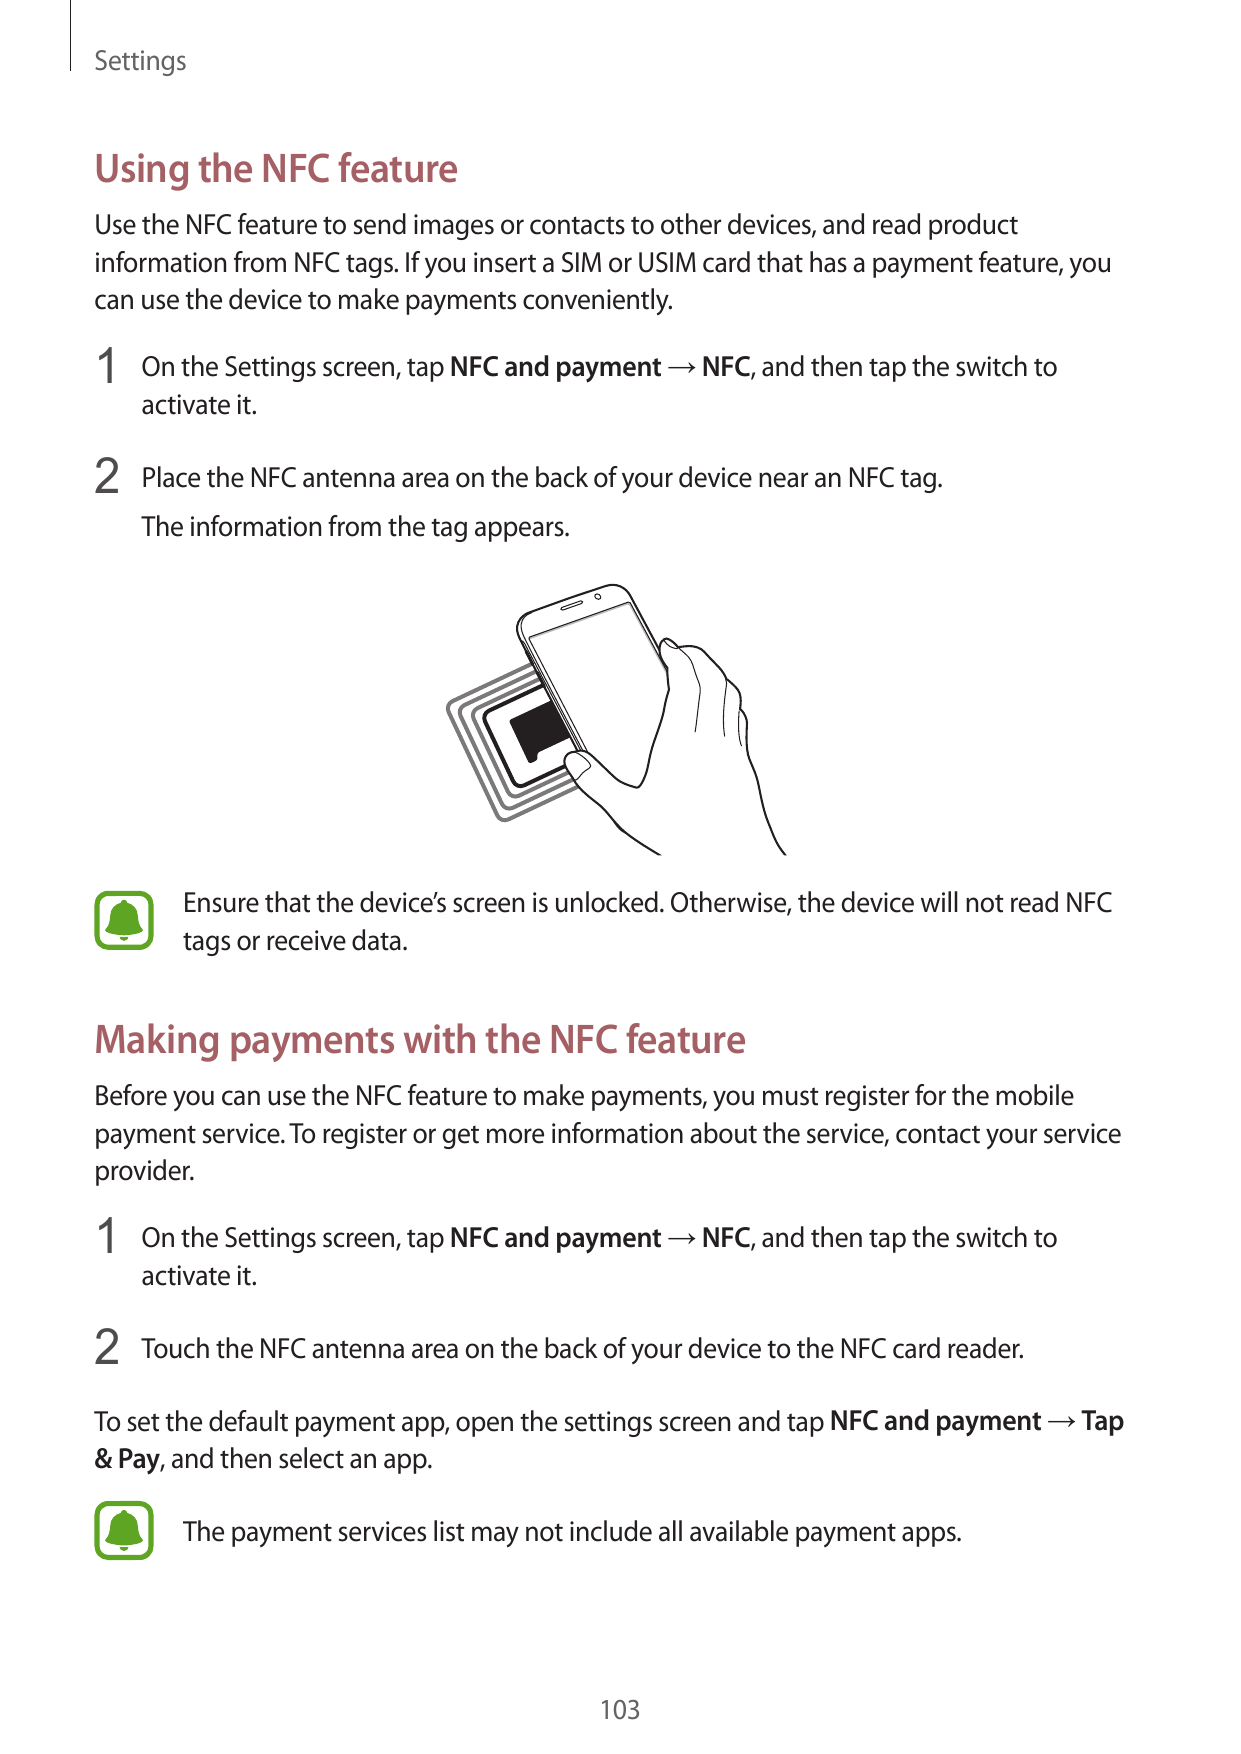 SettingsUsing the NFC featureUse the NFC feature to send images or contacts to other devices, and read productinformation from N